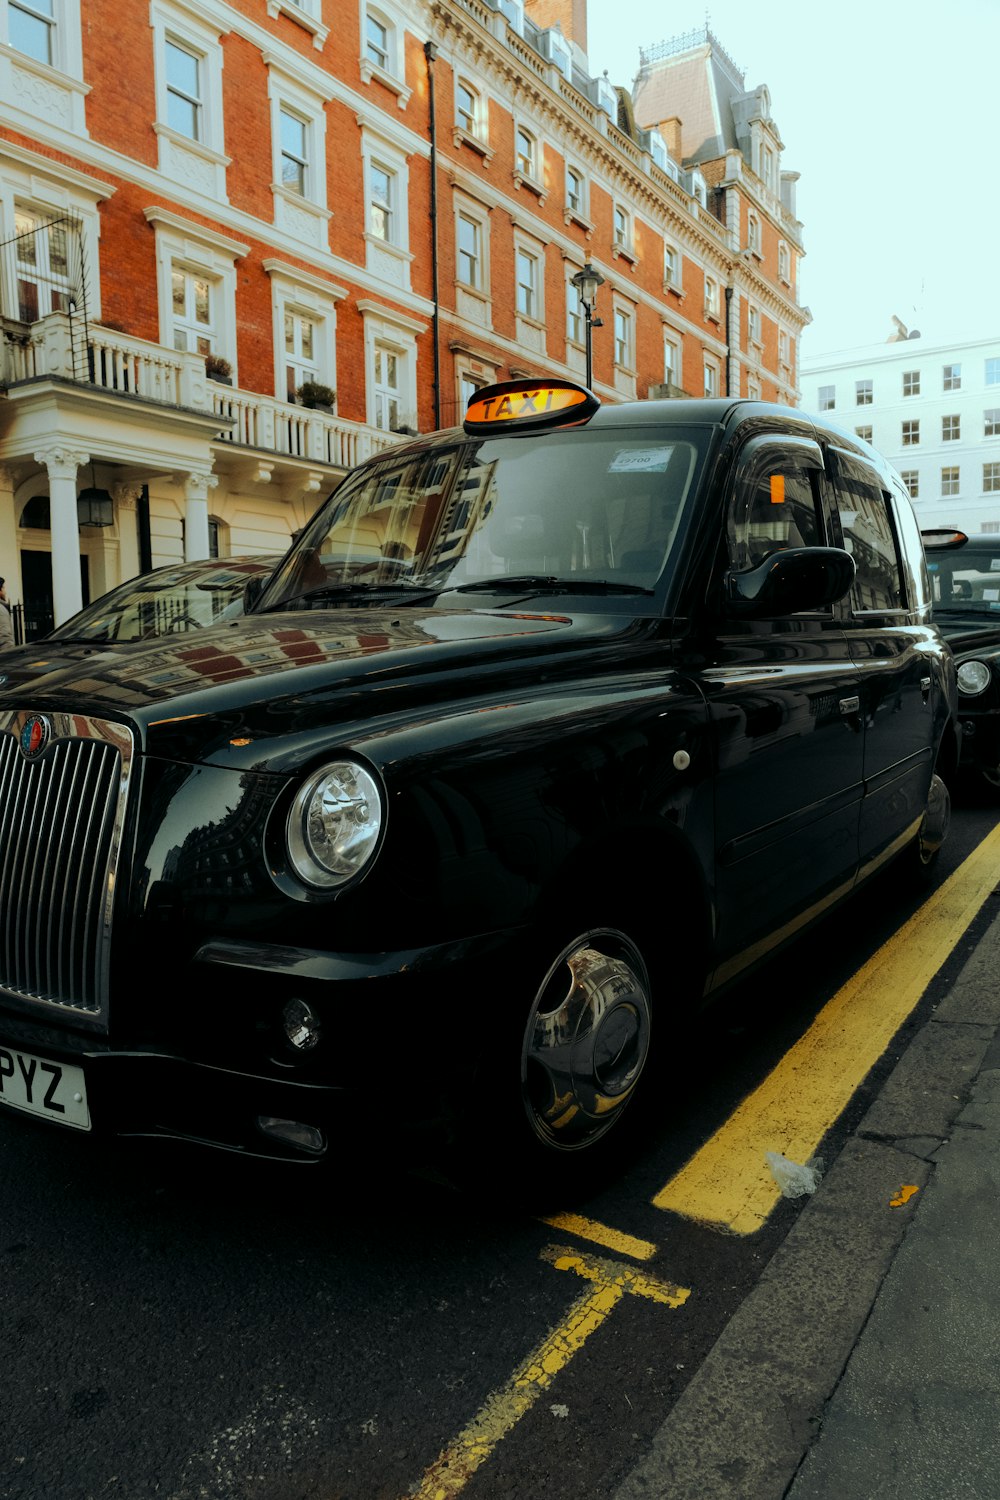 a black taxi cab parked on the side of the road